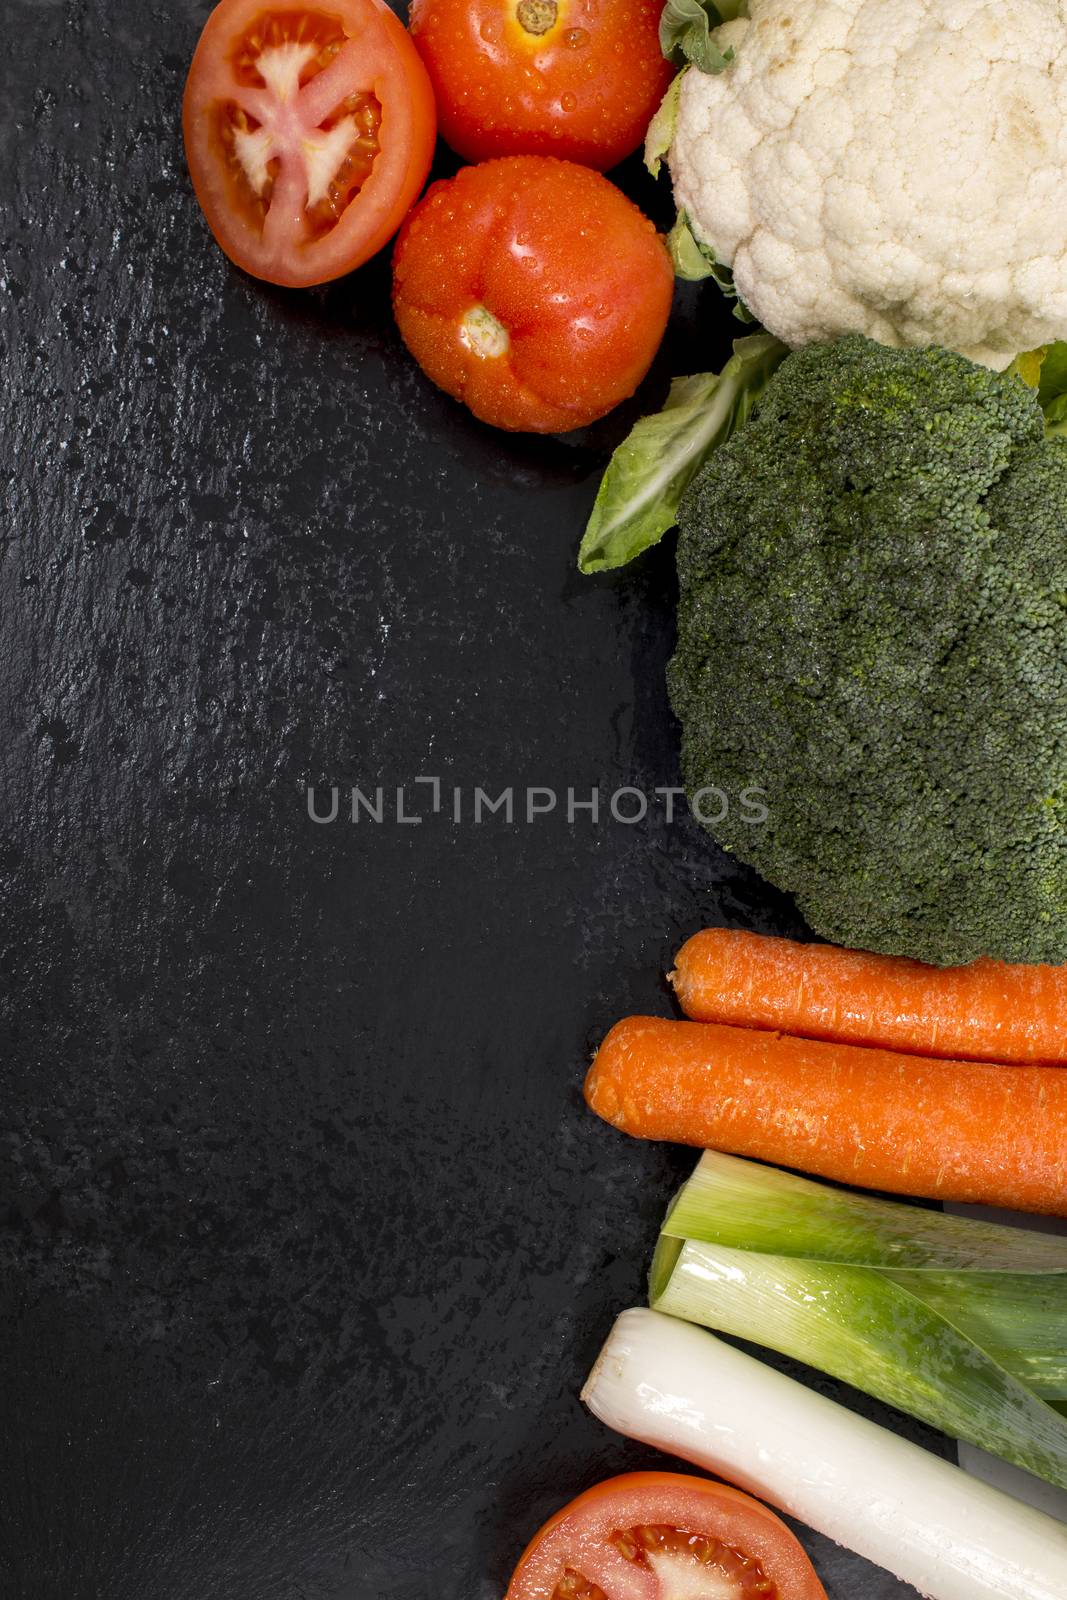 Mixed wet vegetables on top of a black slab of schist.